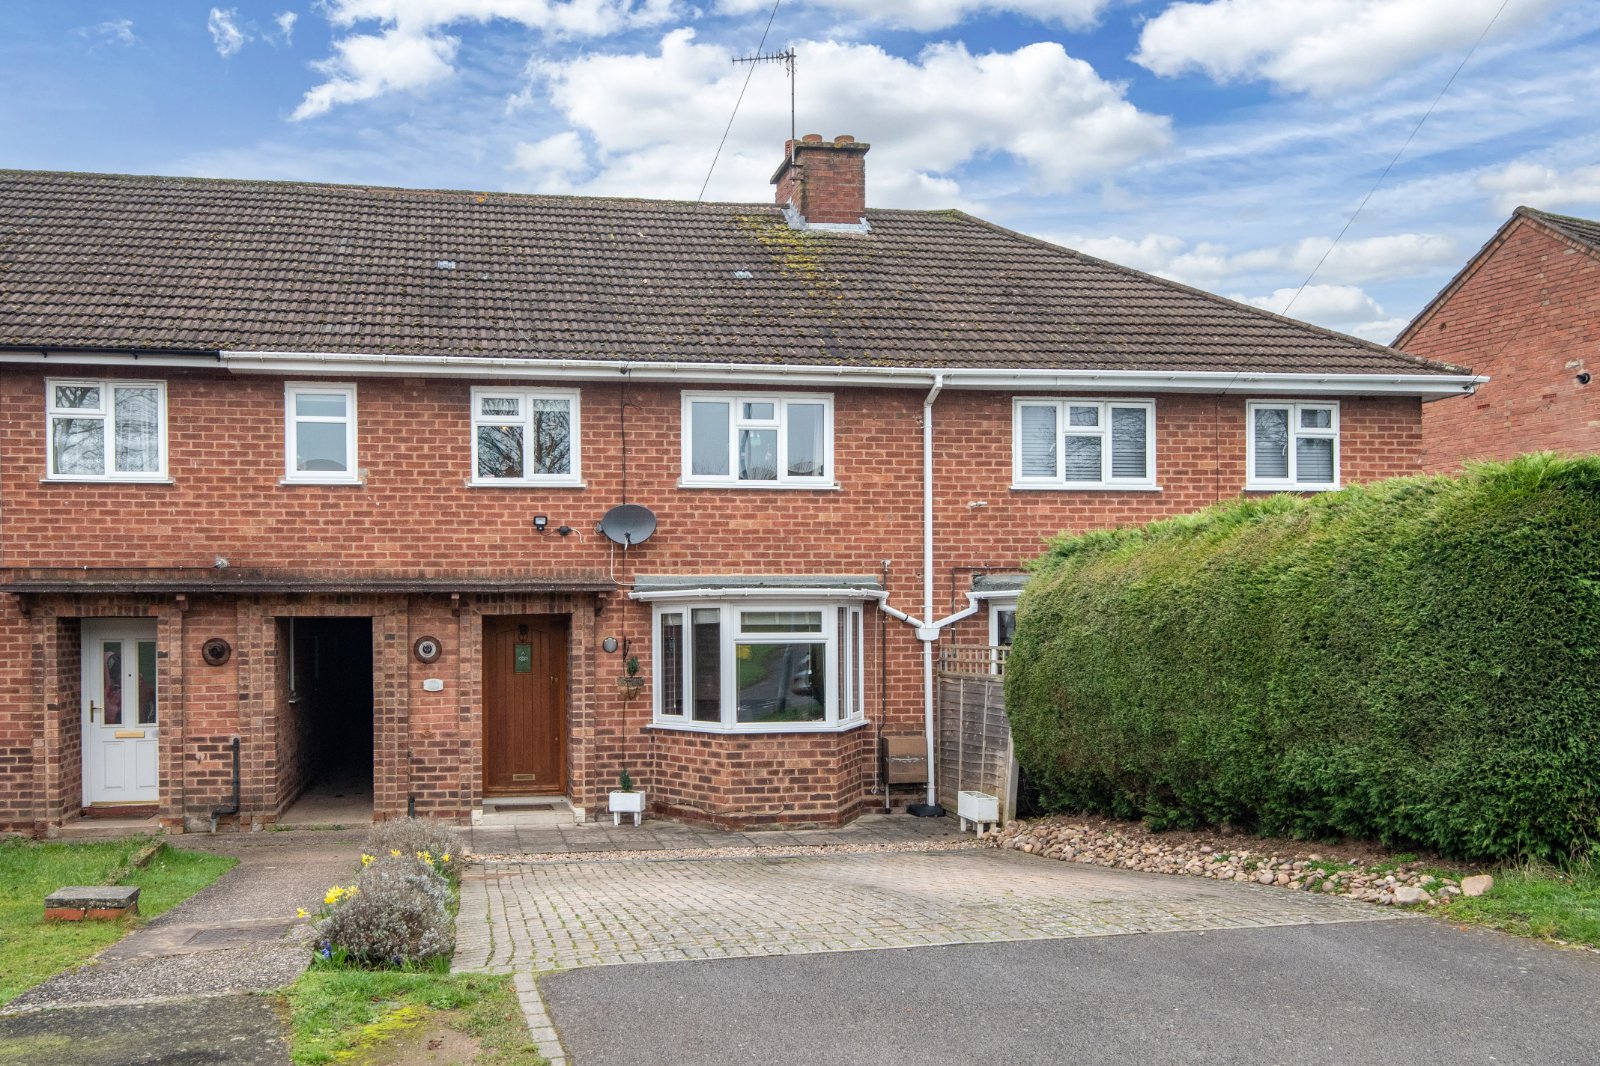 3 bed house for sale in Oak Road, Catshill  - Property Image 1